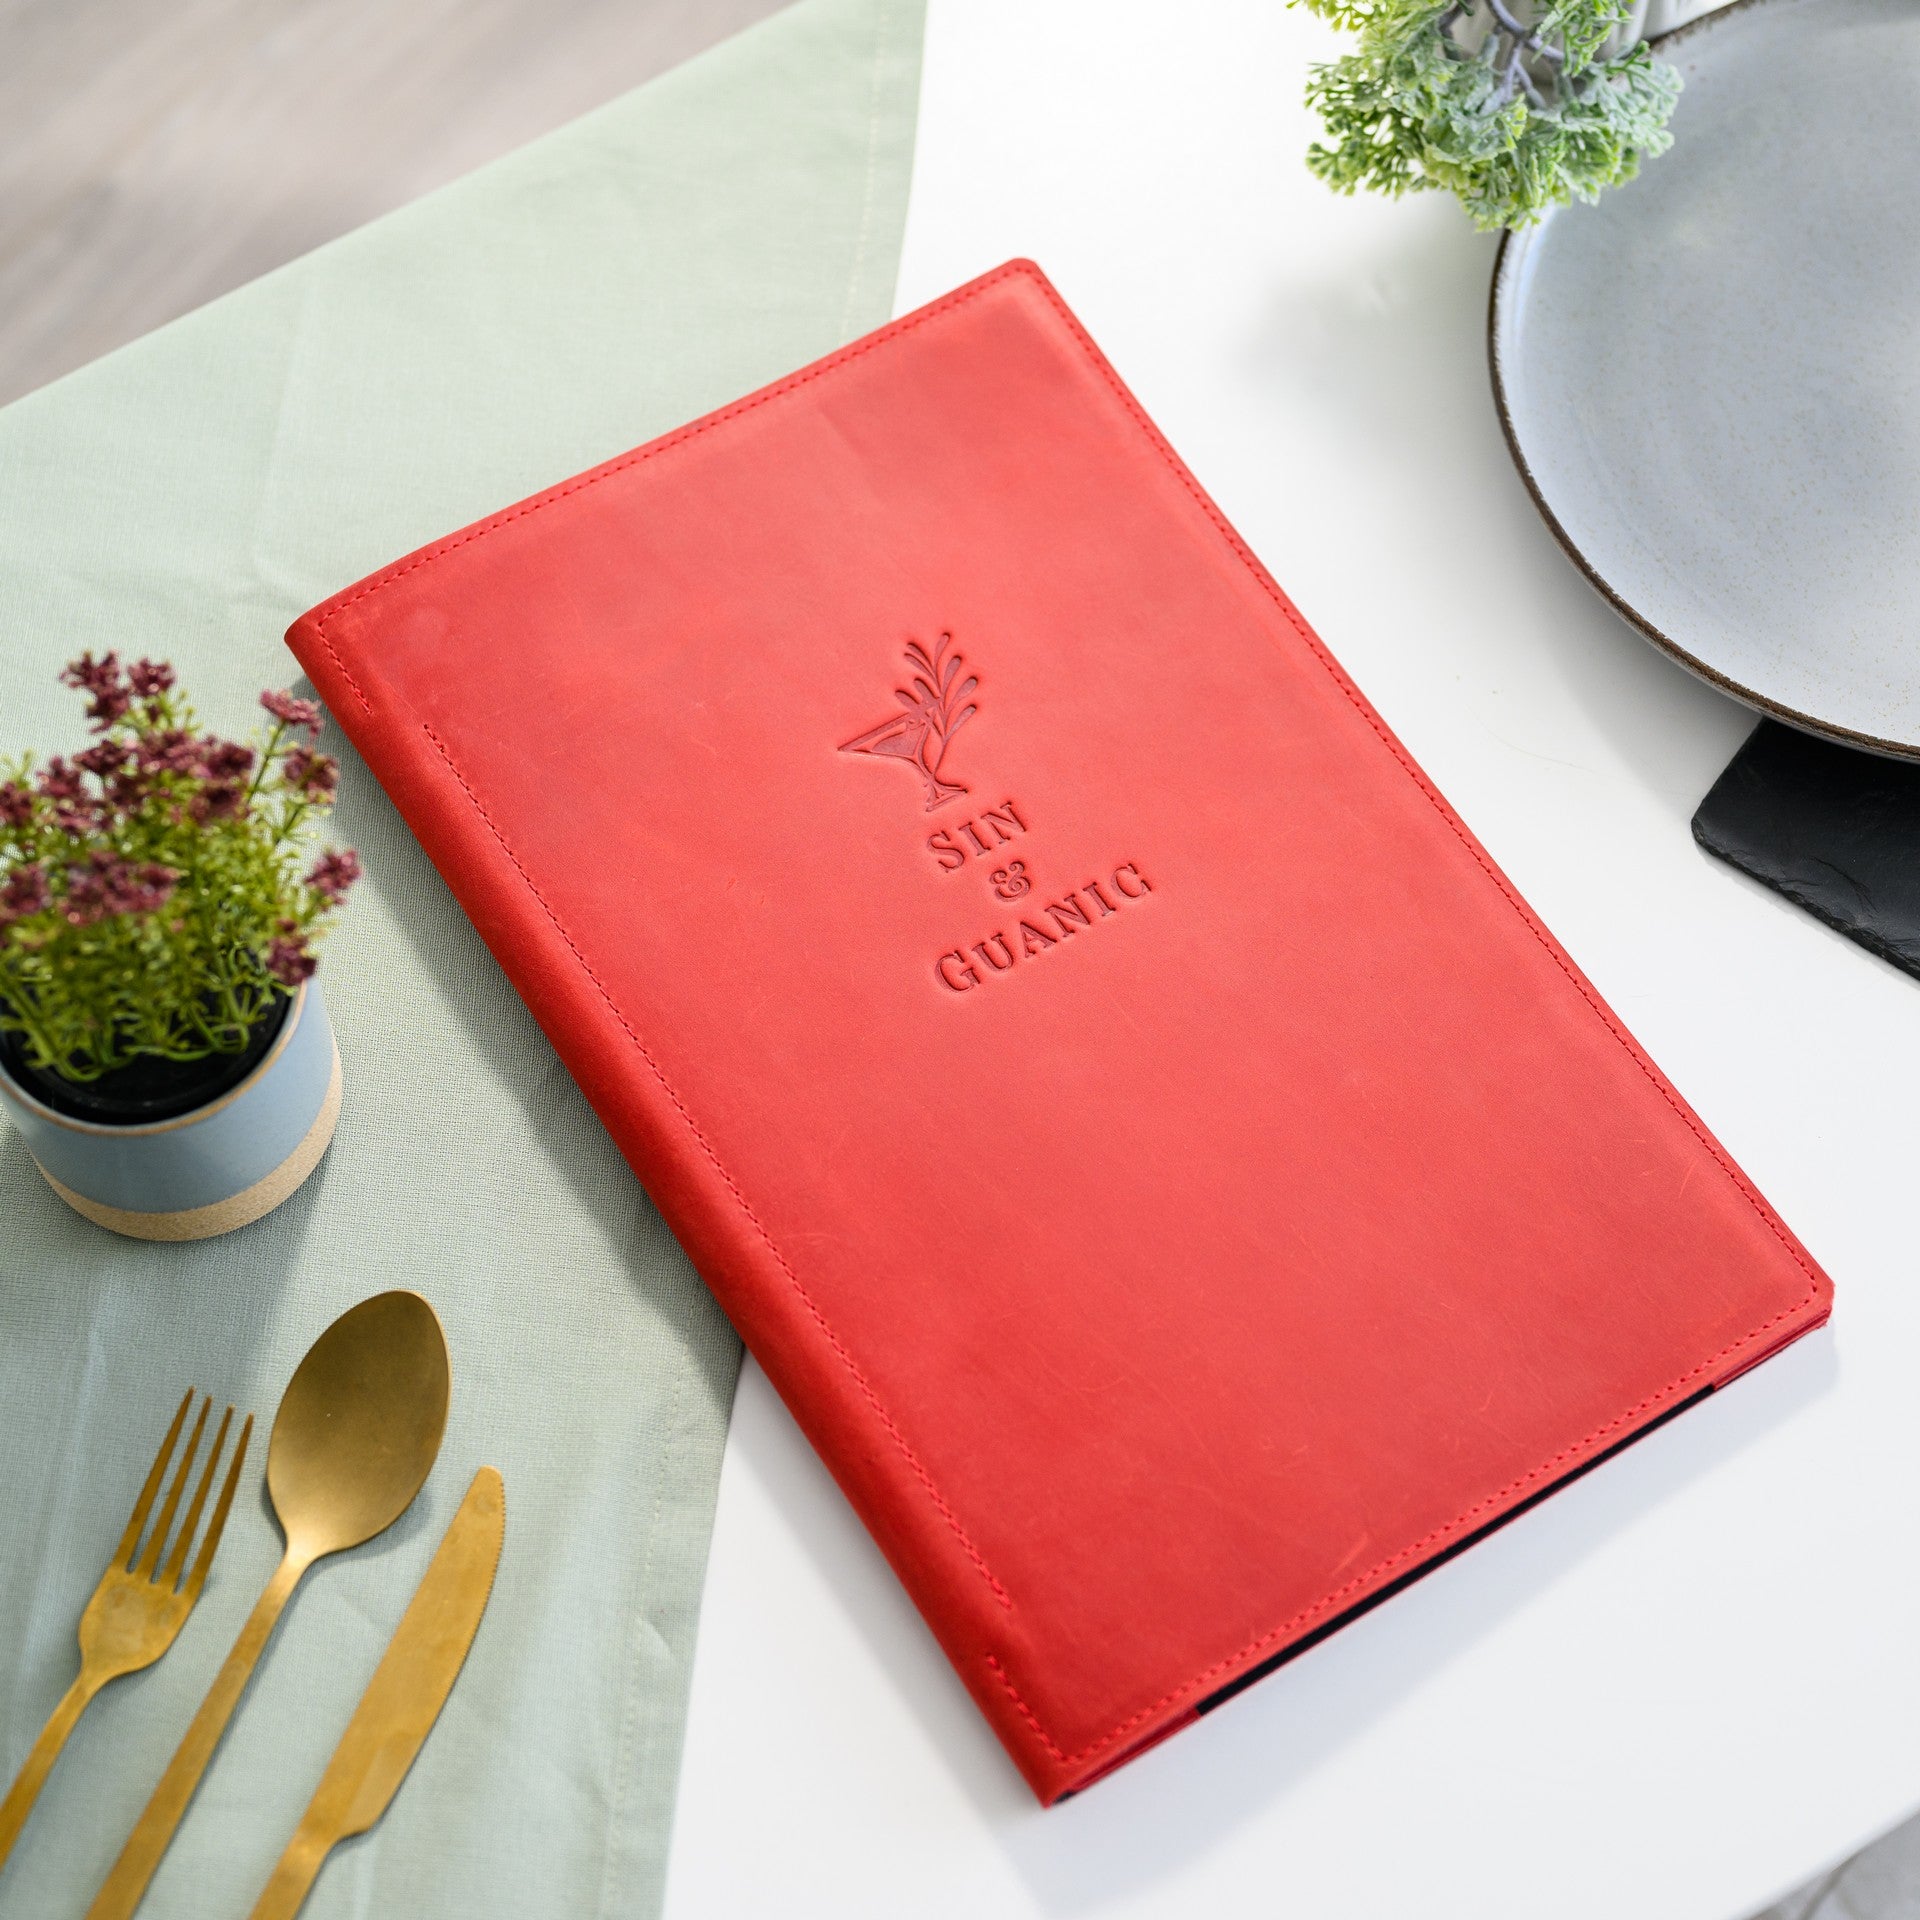 Refined Leather Restaurant Menu Folder, elevating the dining ambiance with its luxurious appeal.